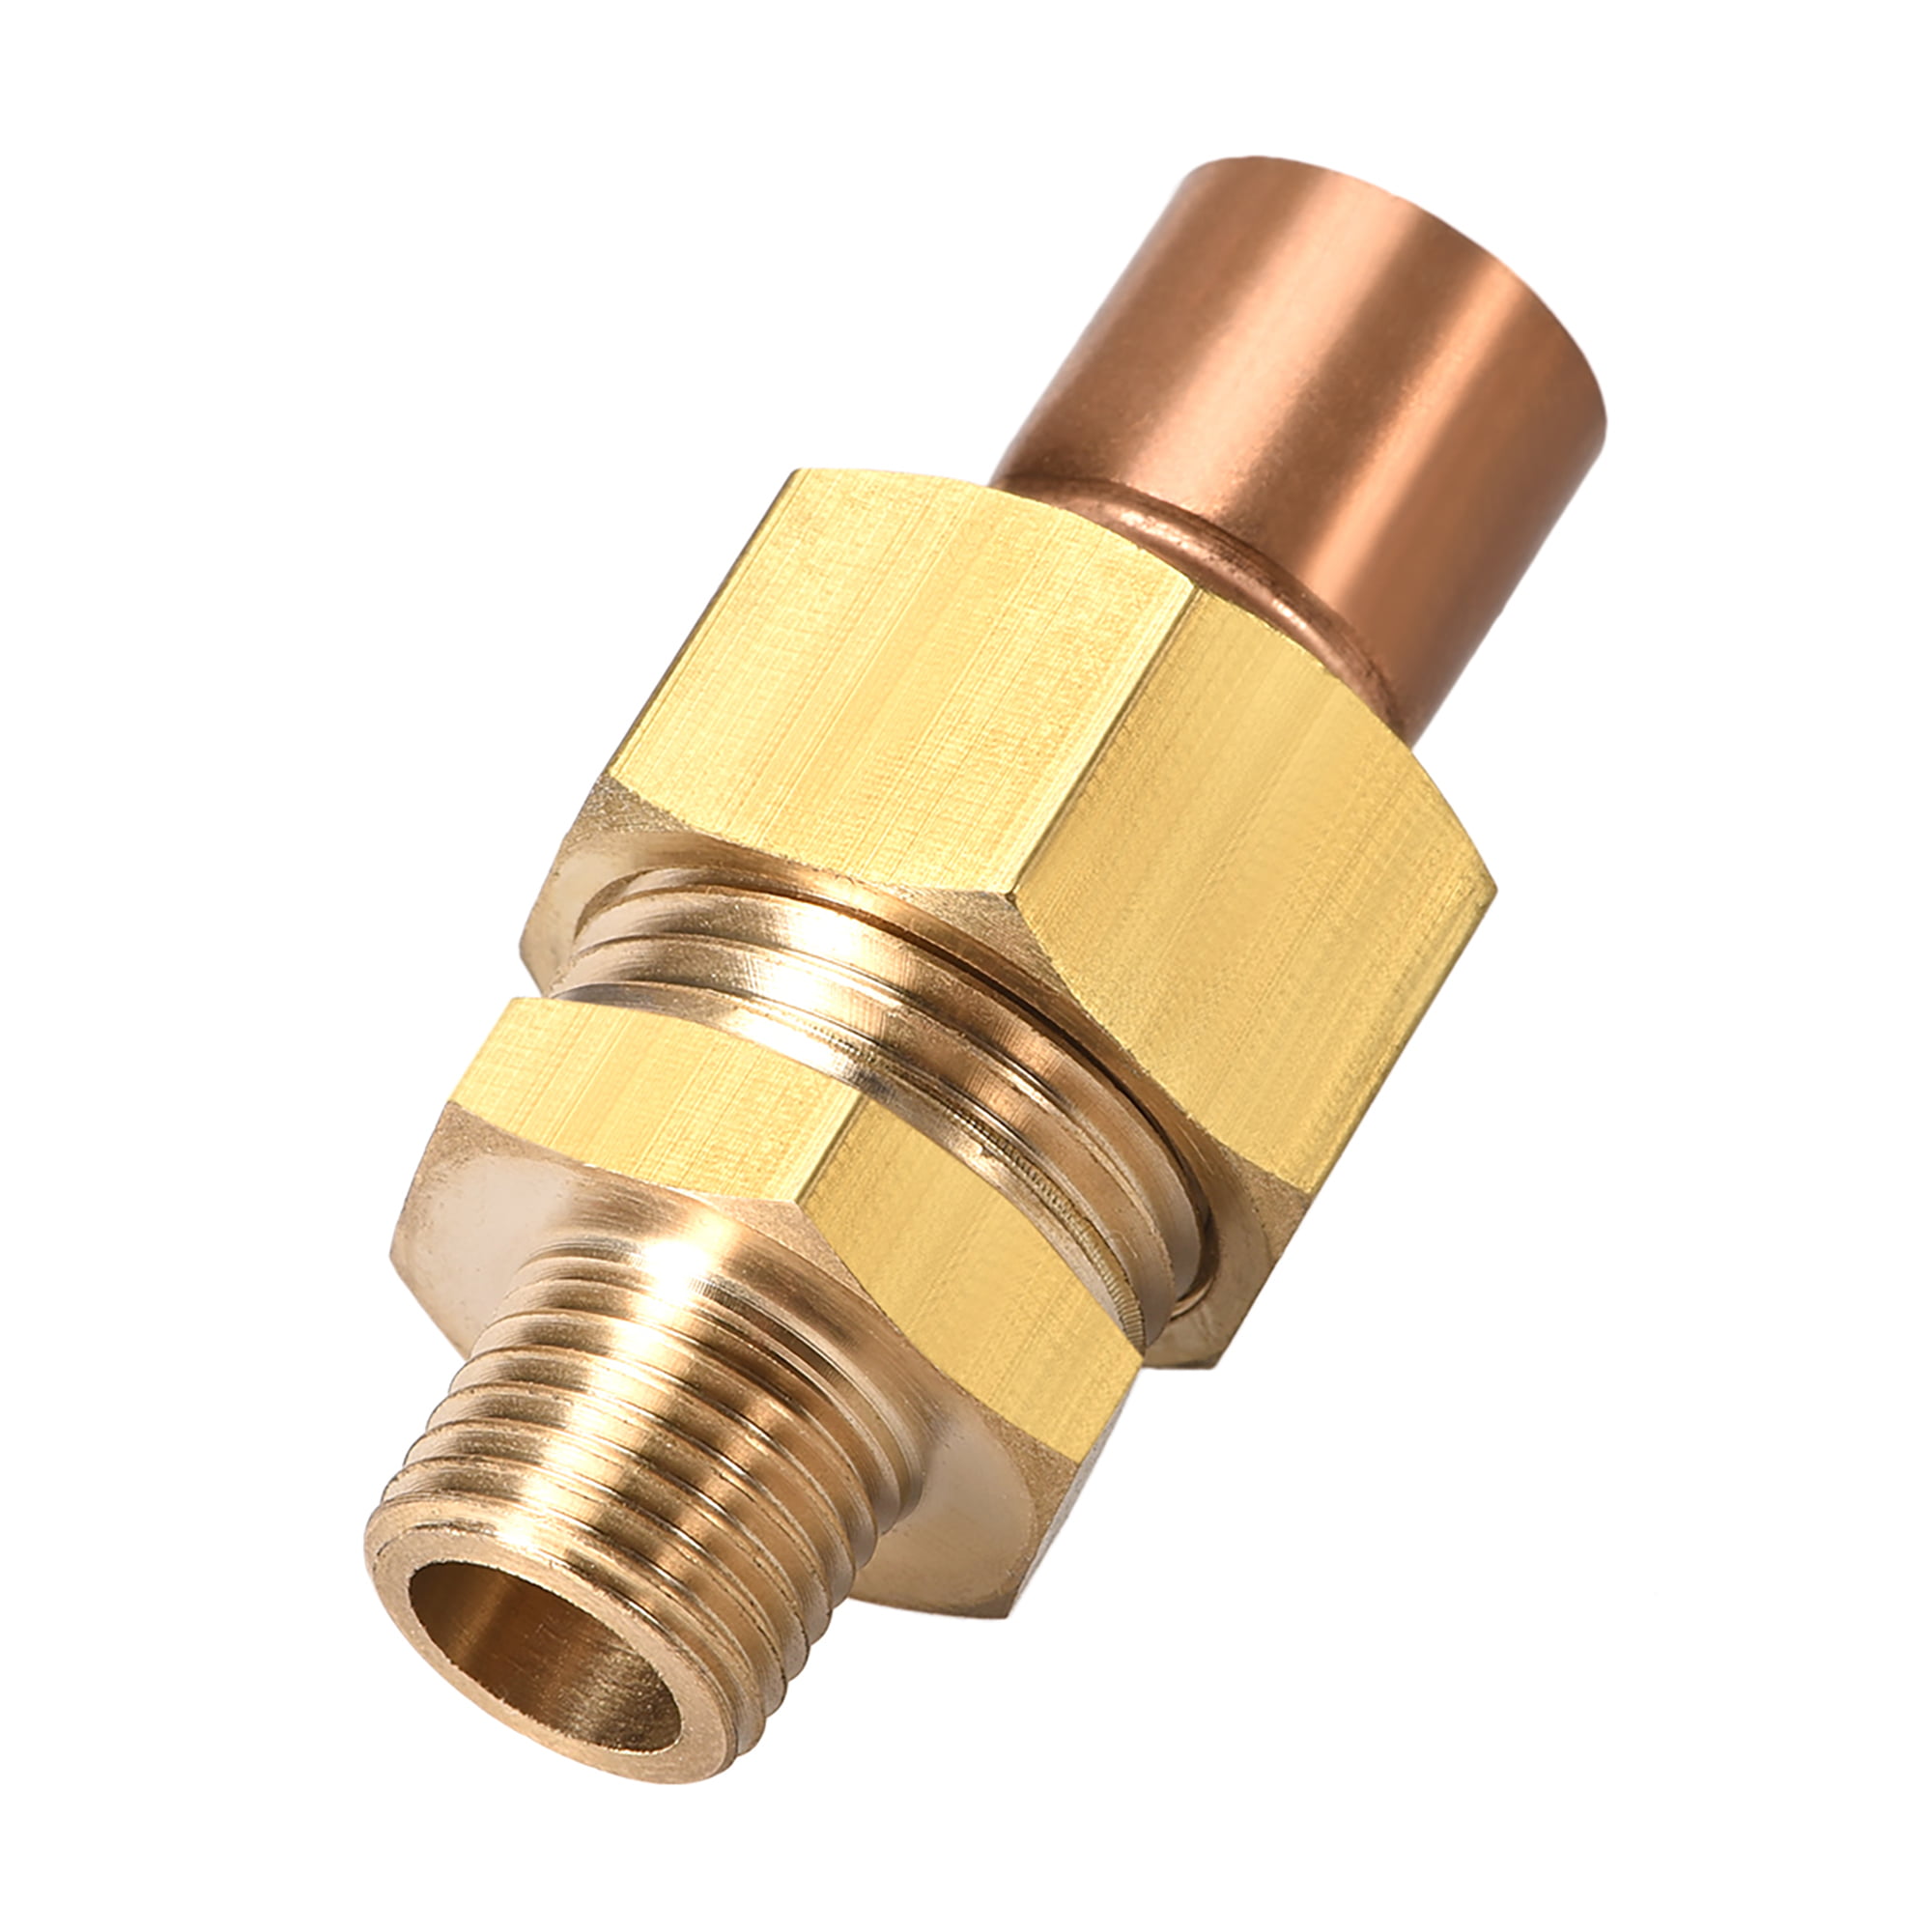 G14 Lead Free Copper Union Fitting With Sweat Solder Joint To Male